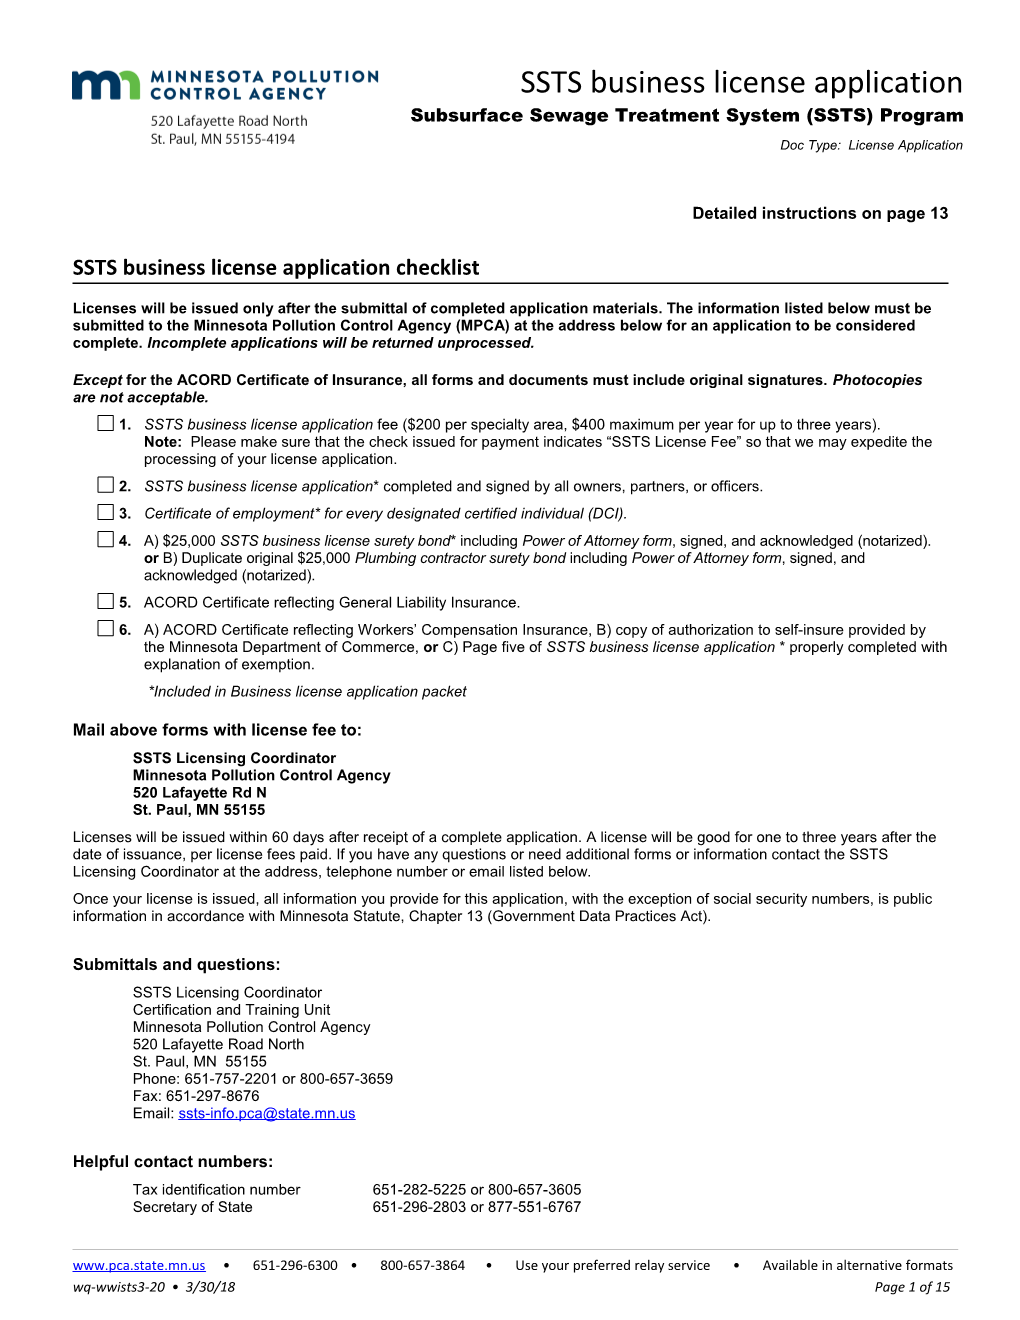 SSTS Business License Application